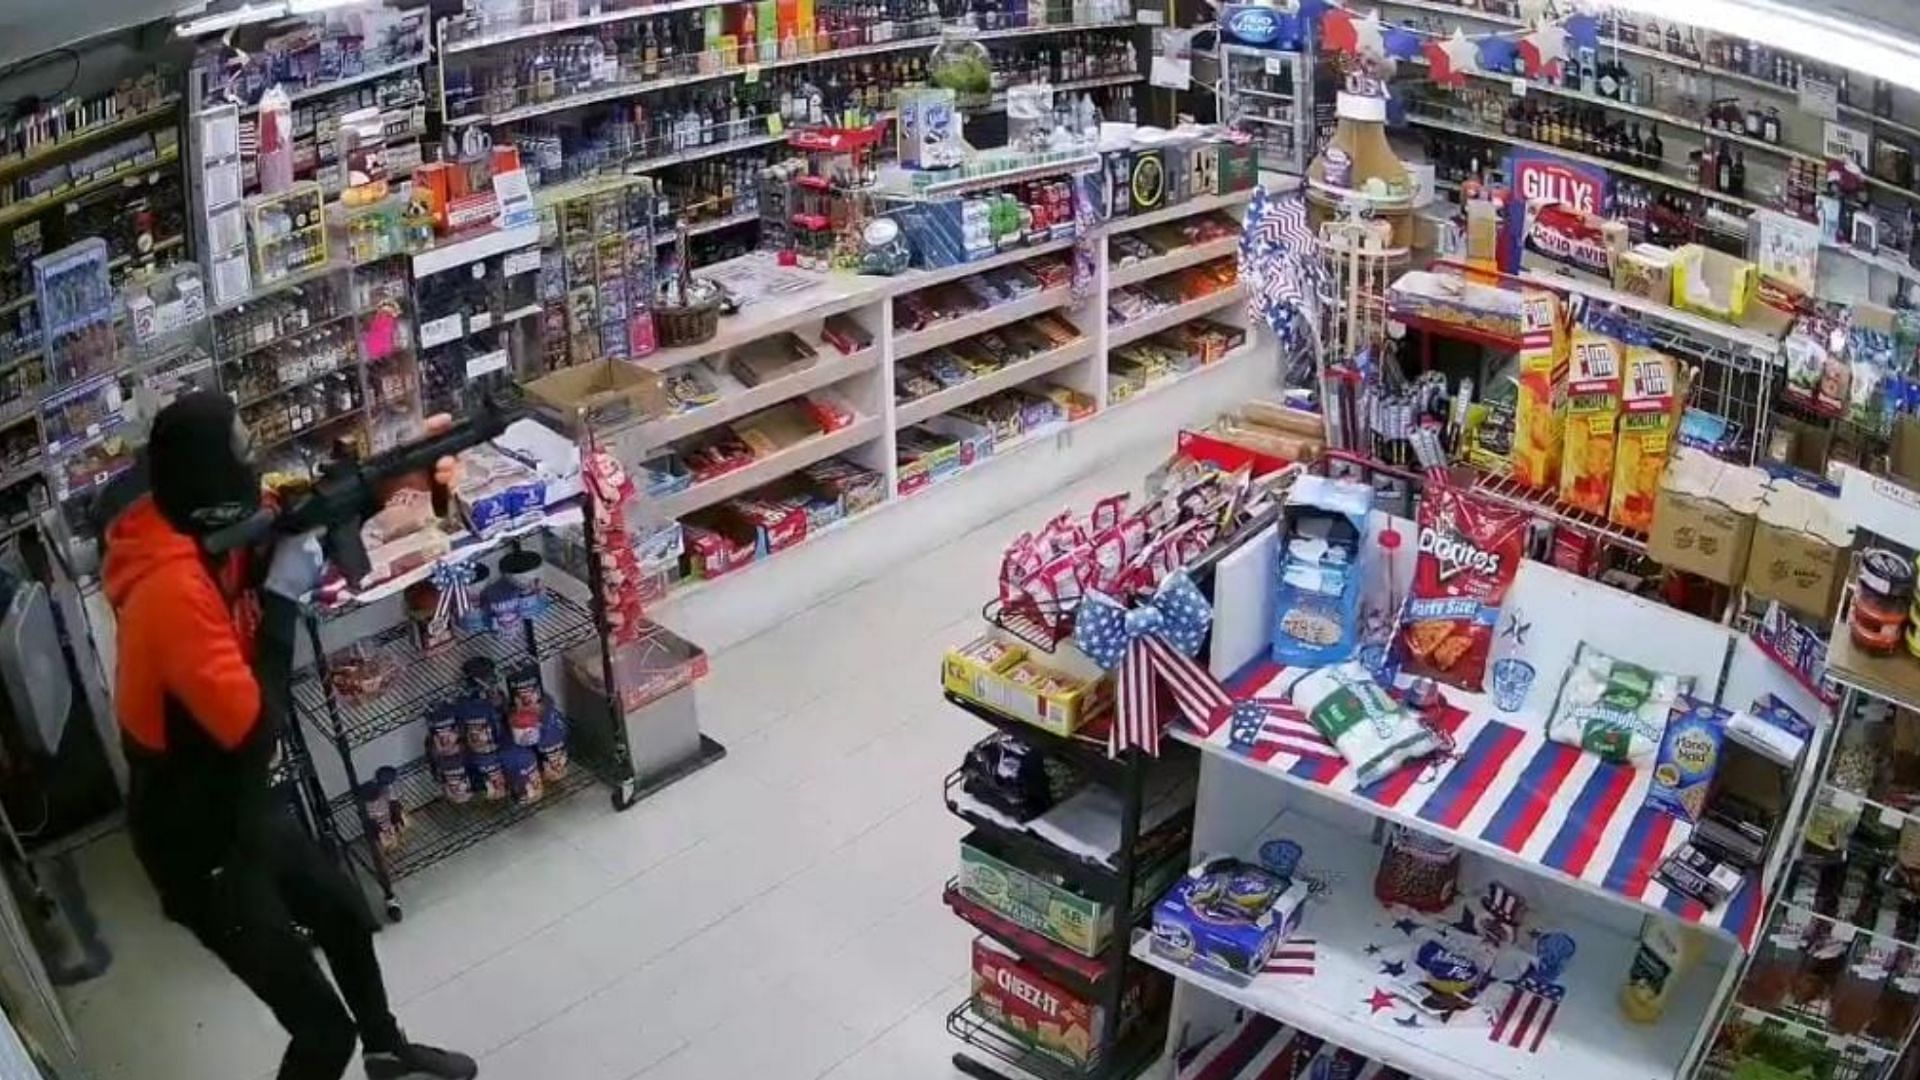 Surveillance footage showed a masked and armed robber aiming his rifle at a California store owner seconds before he was shot in the arm instead (Image via YouTube)